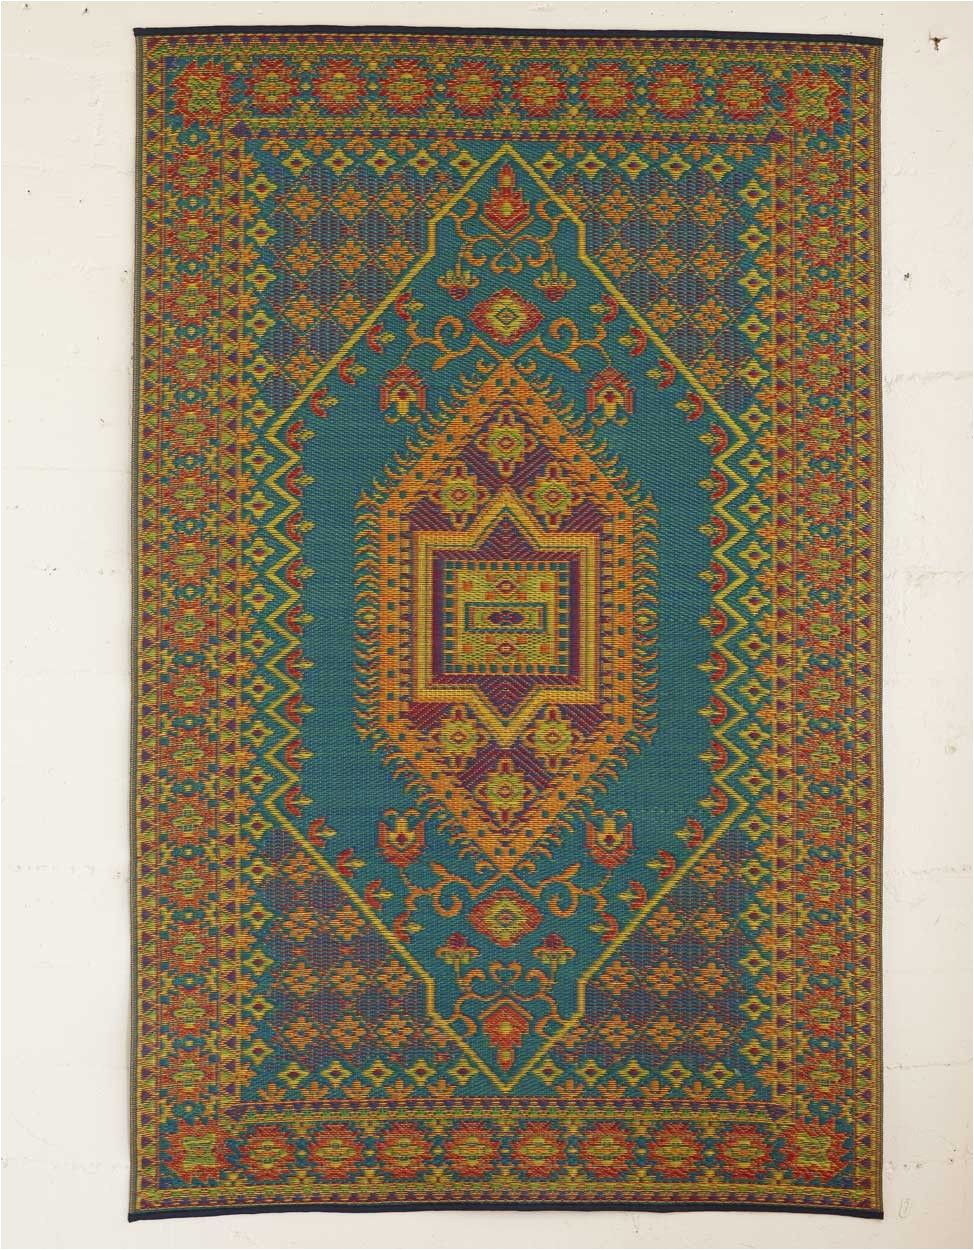 Mad Mats Turkish Outdoor area Rug Turquoise Reclaimed Kasbah Rug I Love Love these Rugs